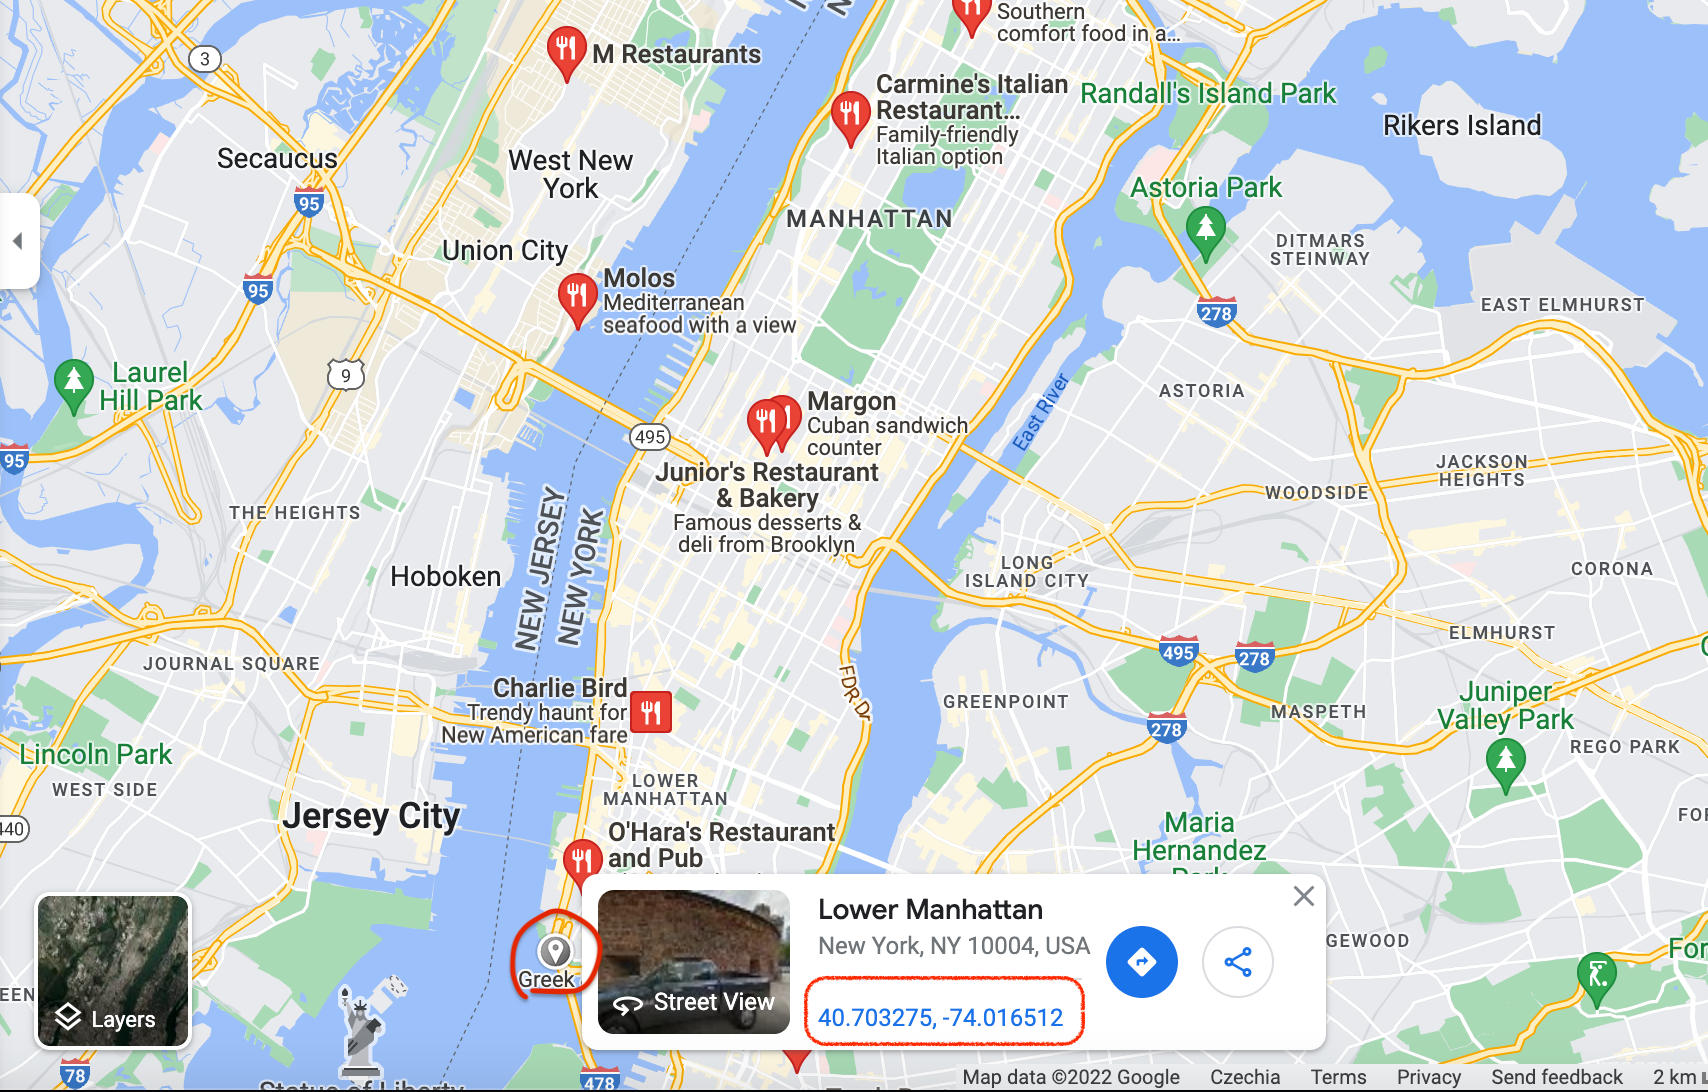 Click anywhere on the map to reveal the coordinates